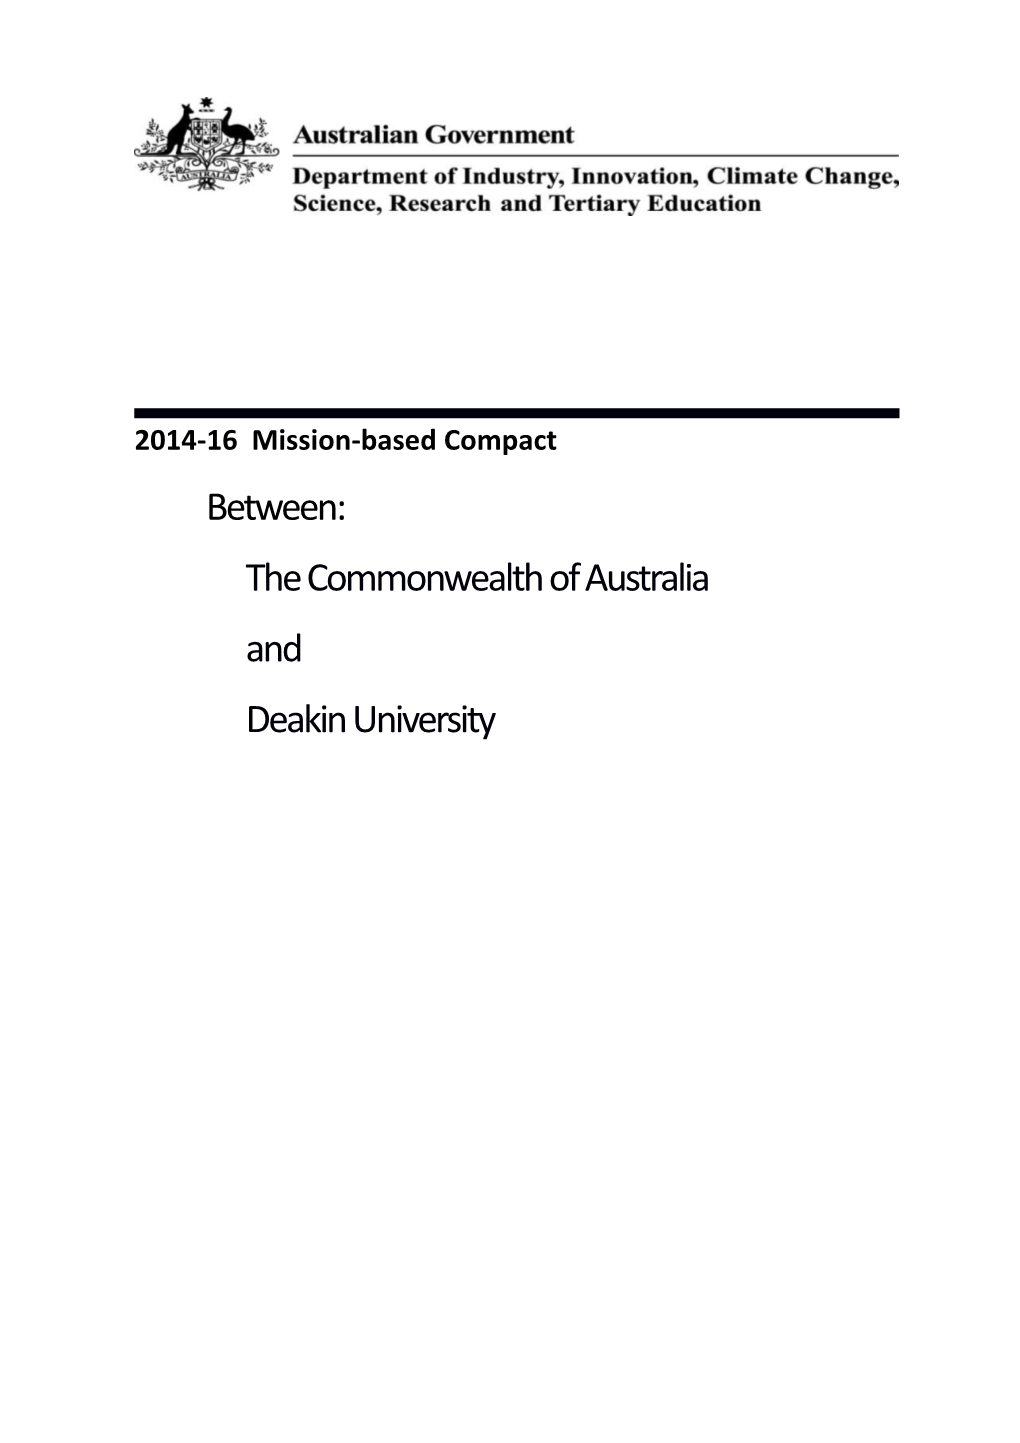 2014-16 Mission-Based Compact